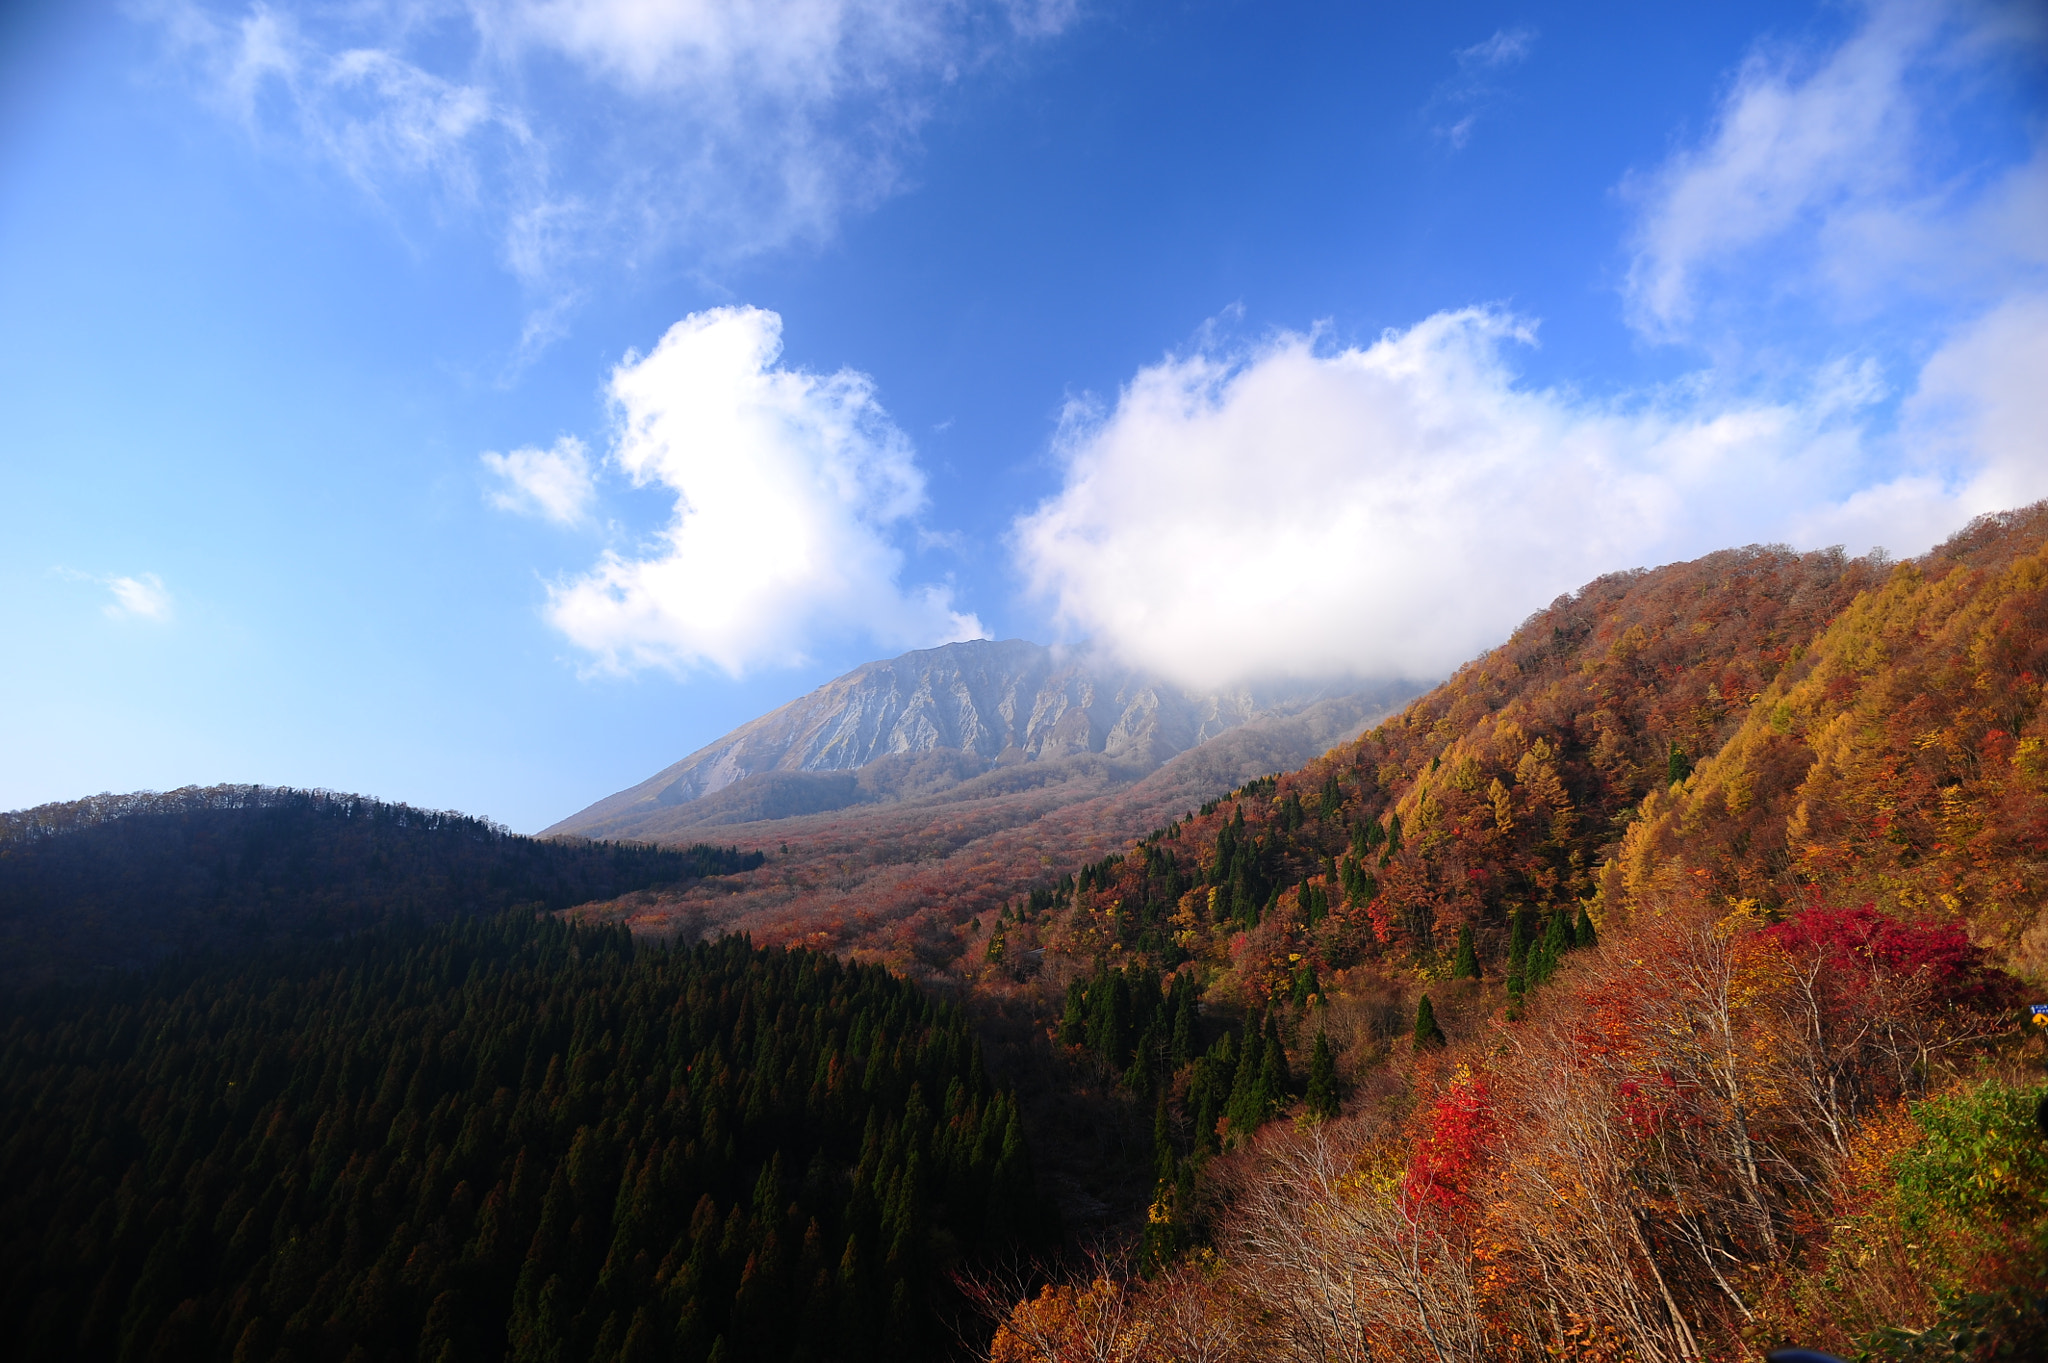 AF Nikkor 20mm f/2.8 sample photo. The kagikake mountain pass that turned red photography